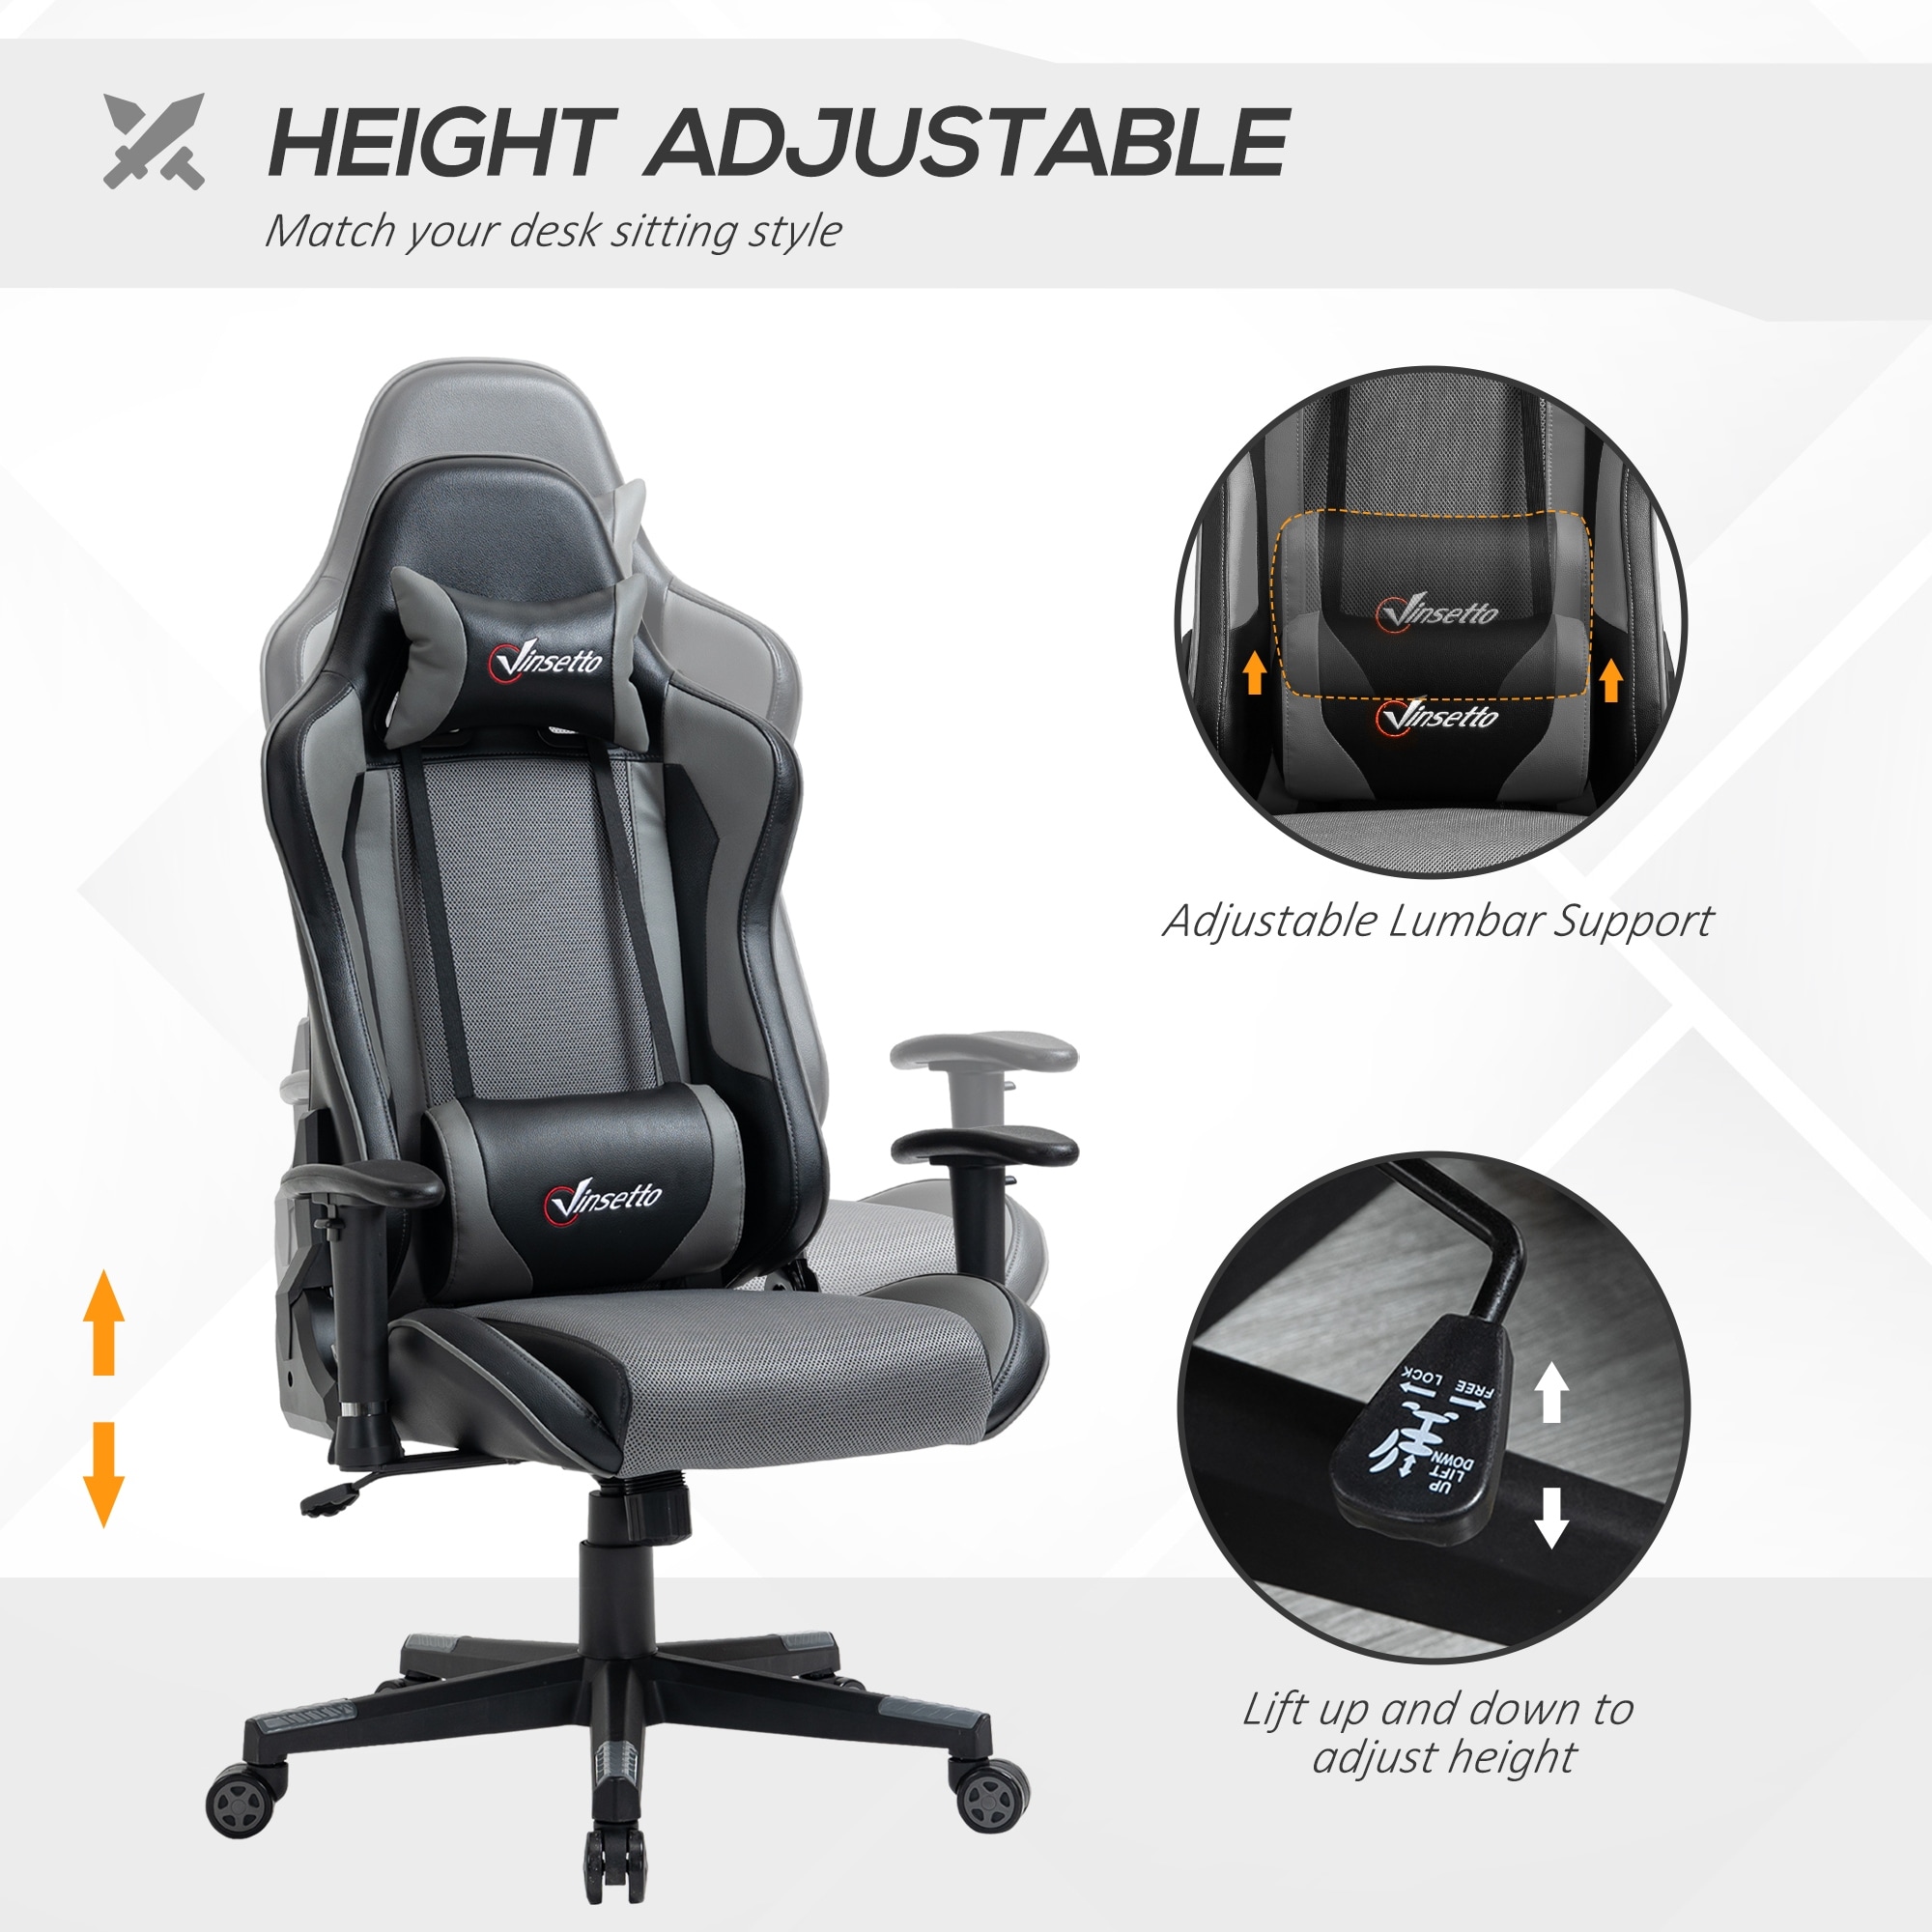 https://ak1.ostkcdn.com/images/products/is/images/direct/49693a7665503e54d8debb04739455cf360f0189/Vinsetto-Gaming-Chair-Racing-Style-Ergonomic-Office-Chair-High-Back-Computer-Desk-Chair-Adjustable-Height-Swivel-Recliner.jpg